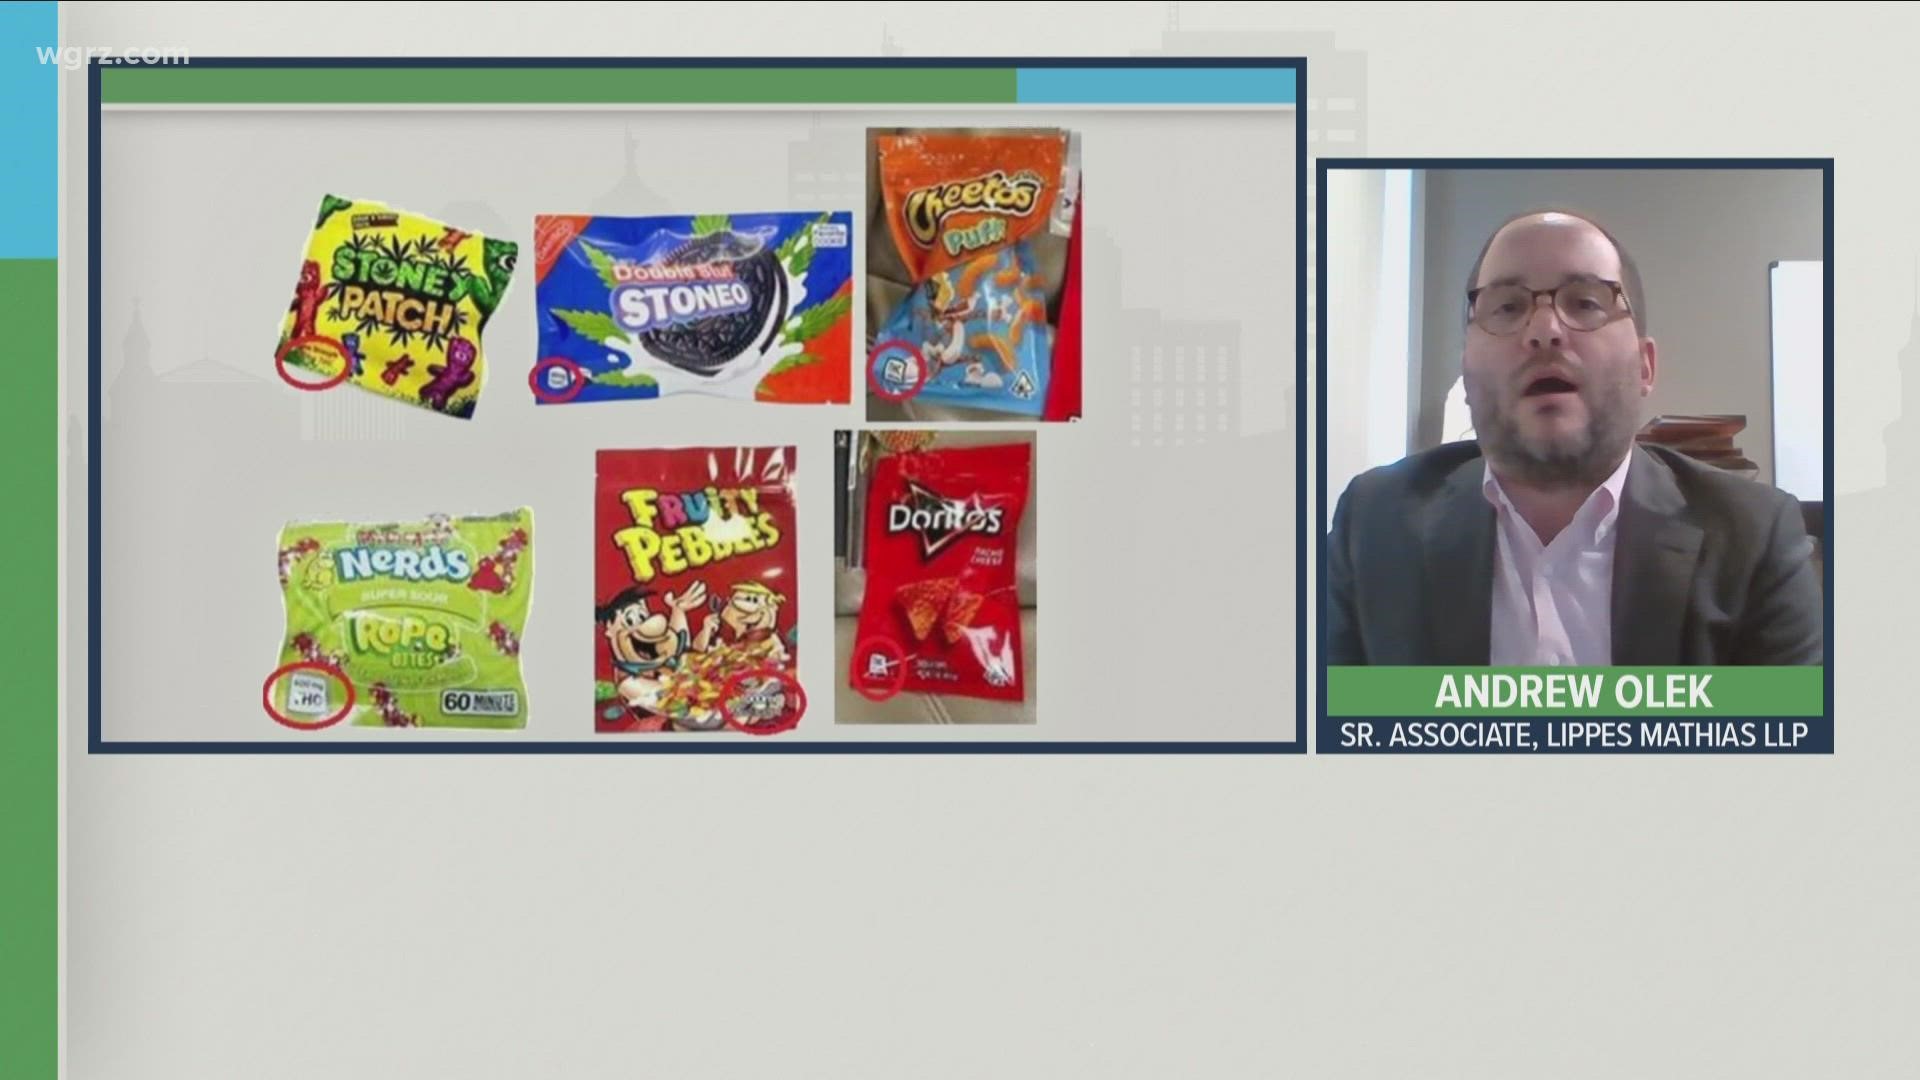 Andrew Olek Sr. Associate, Lippes Mathias LLP joins our town hall to discuss Halloween treats that may contain THC